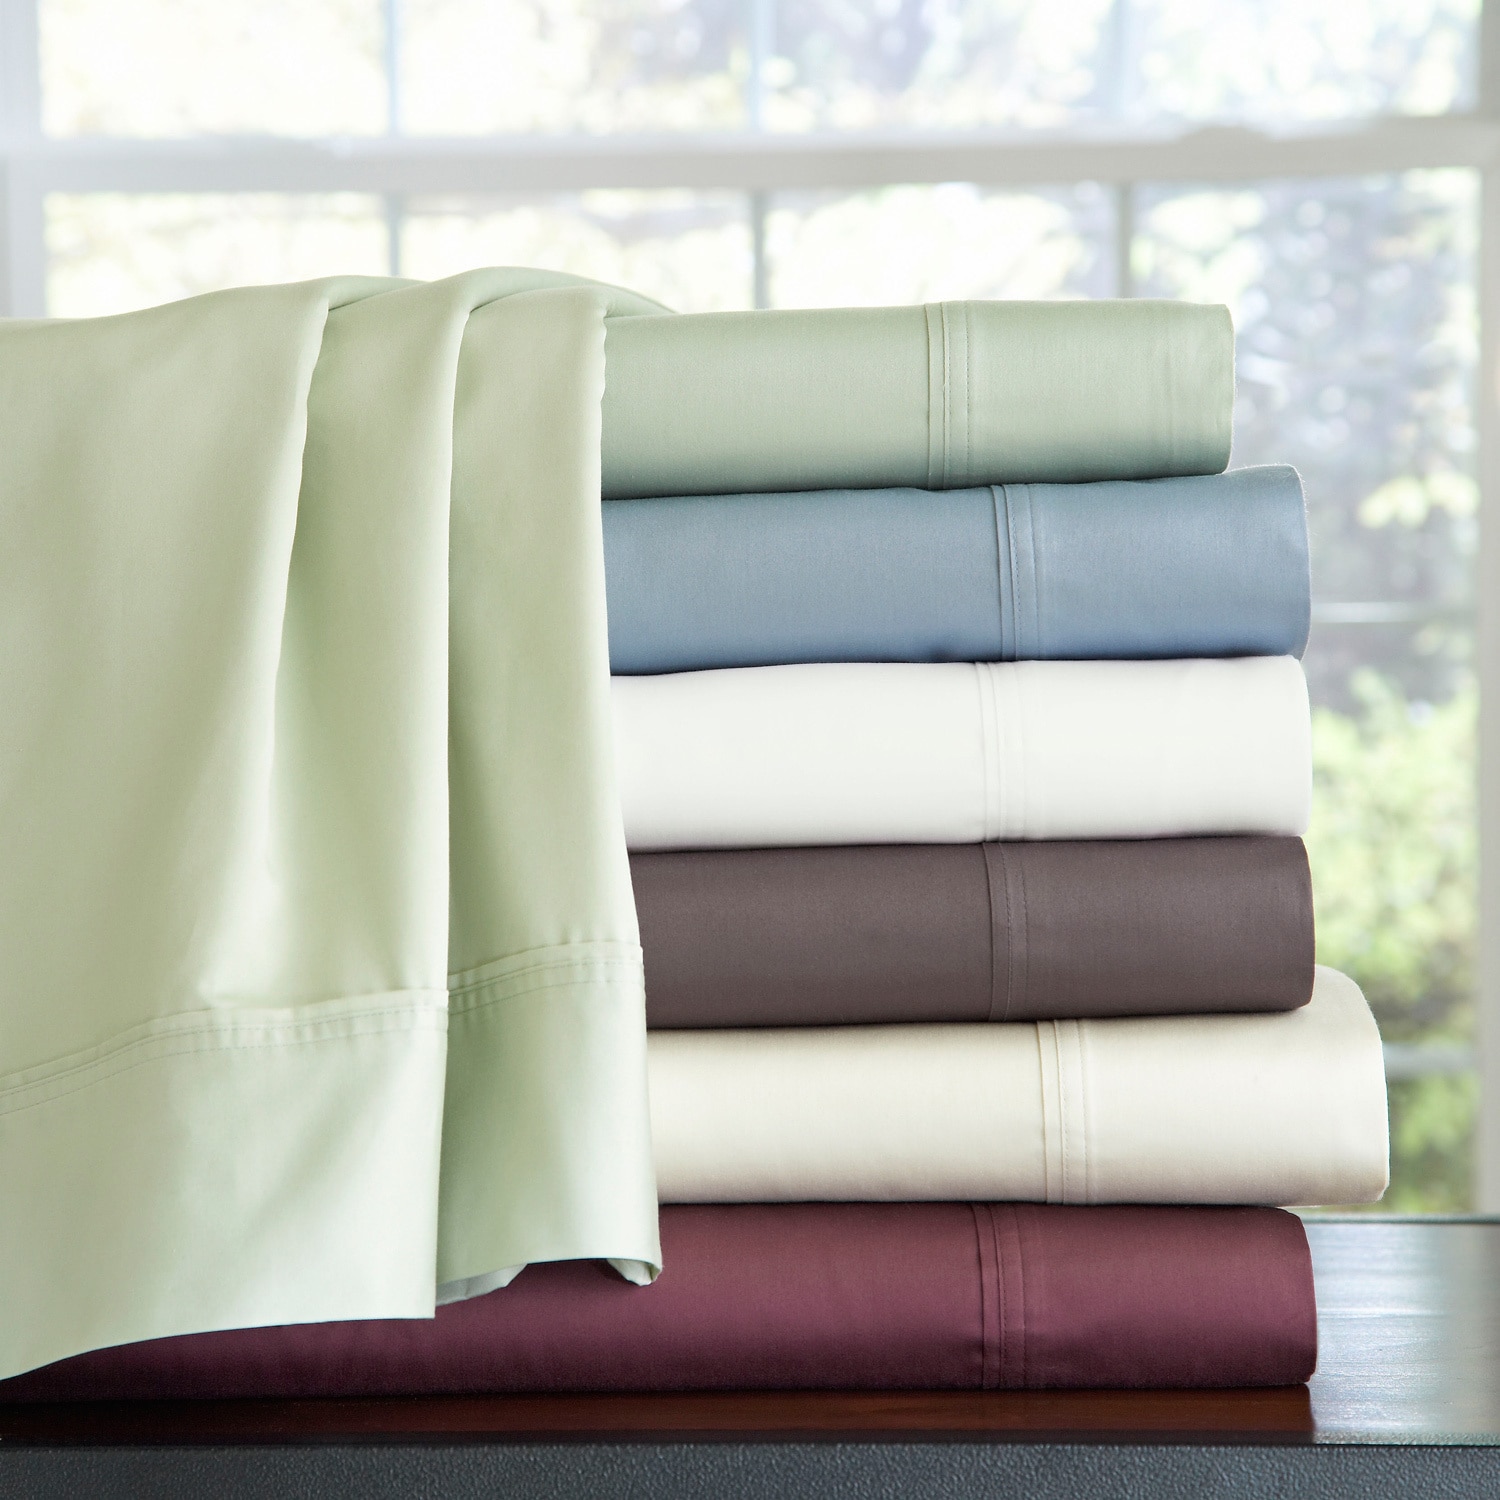 Details about  / Deep Pocket Bedding Item 1000 TC Egyptian Cotton US Size /& Wine Solid